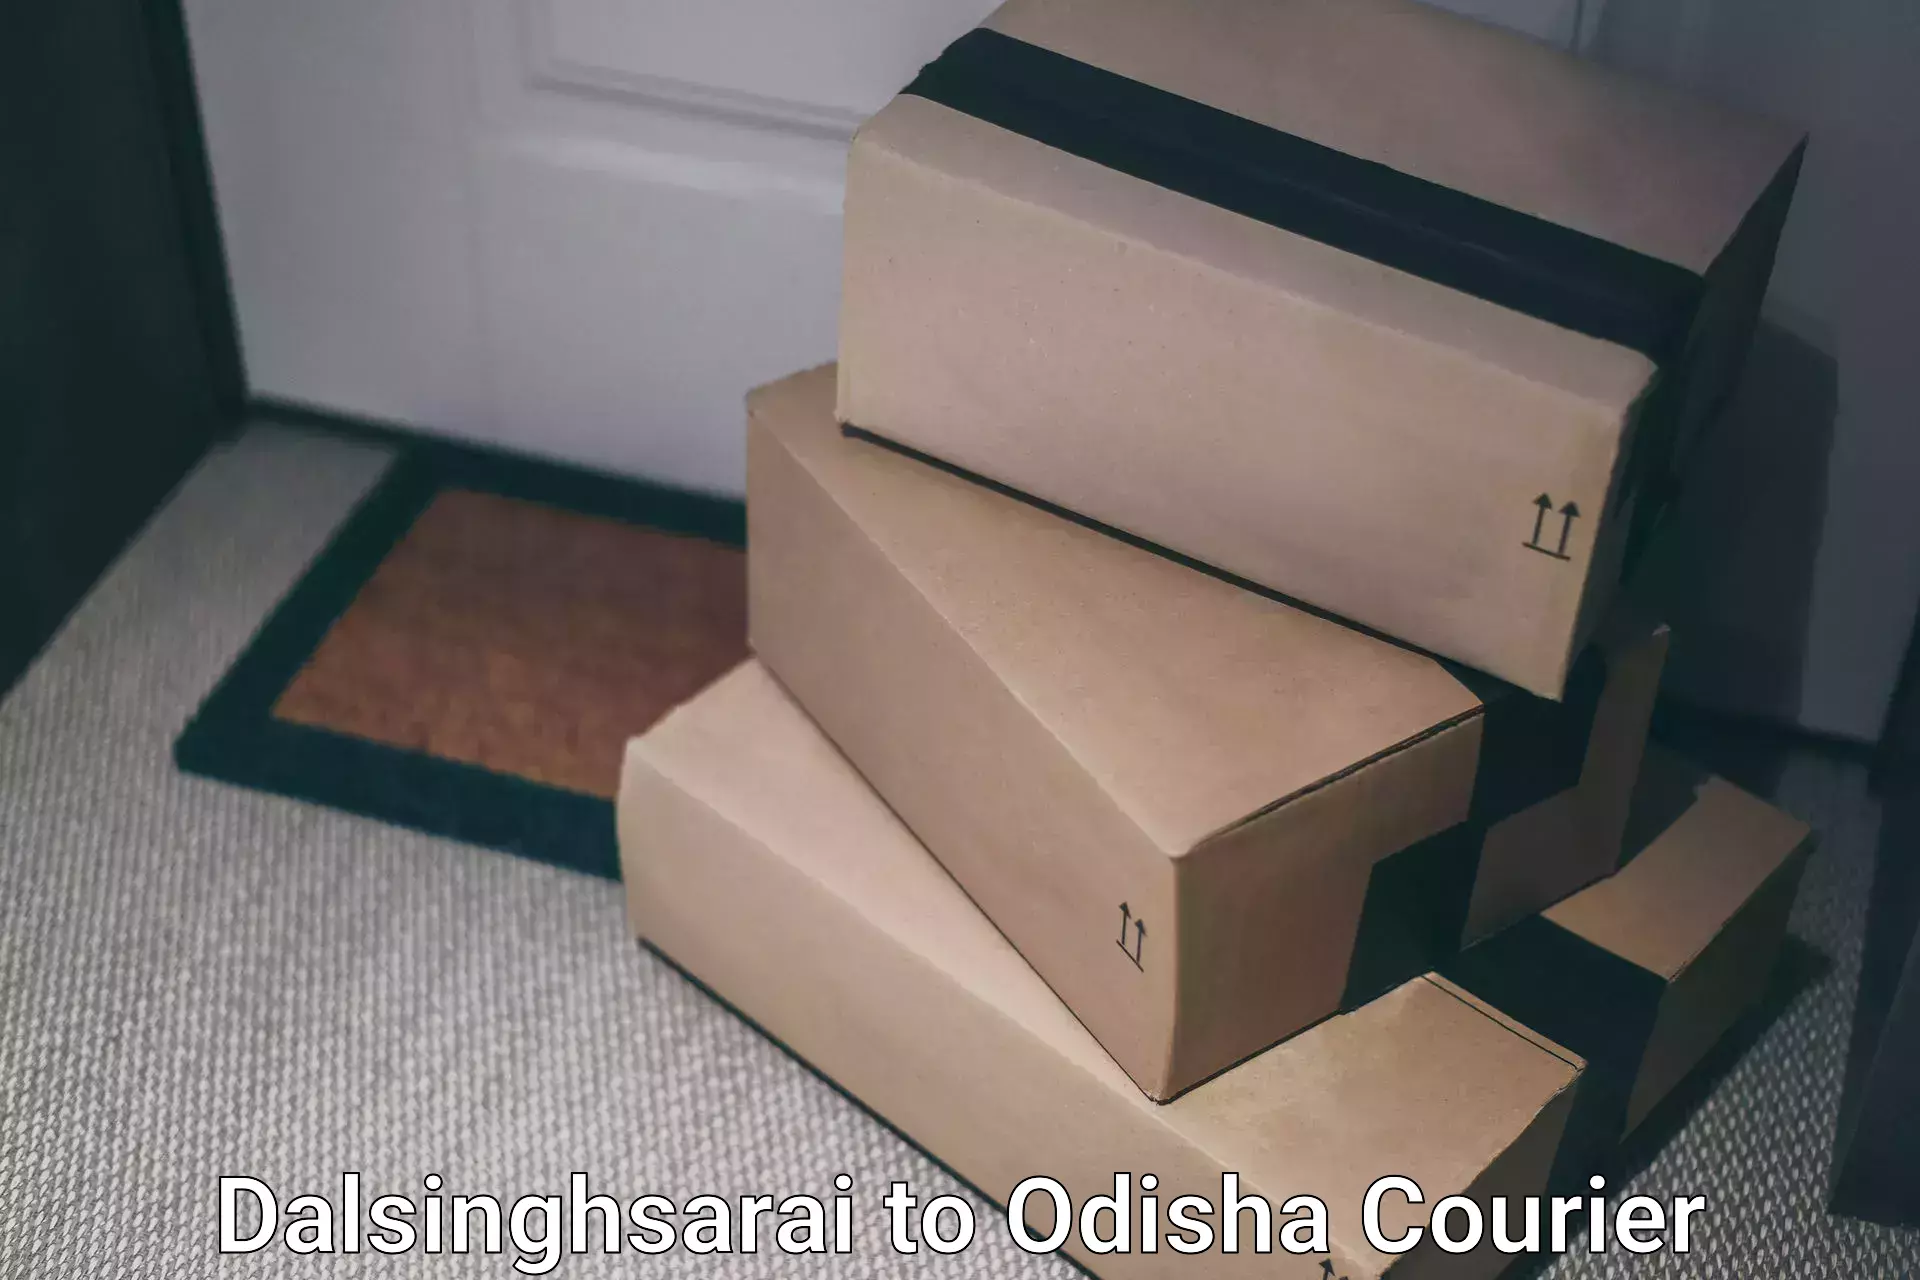 Express delivery solutions Dalsinghsarai to Chandipur